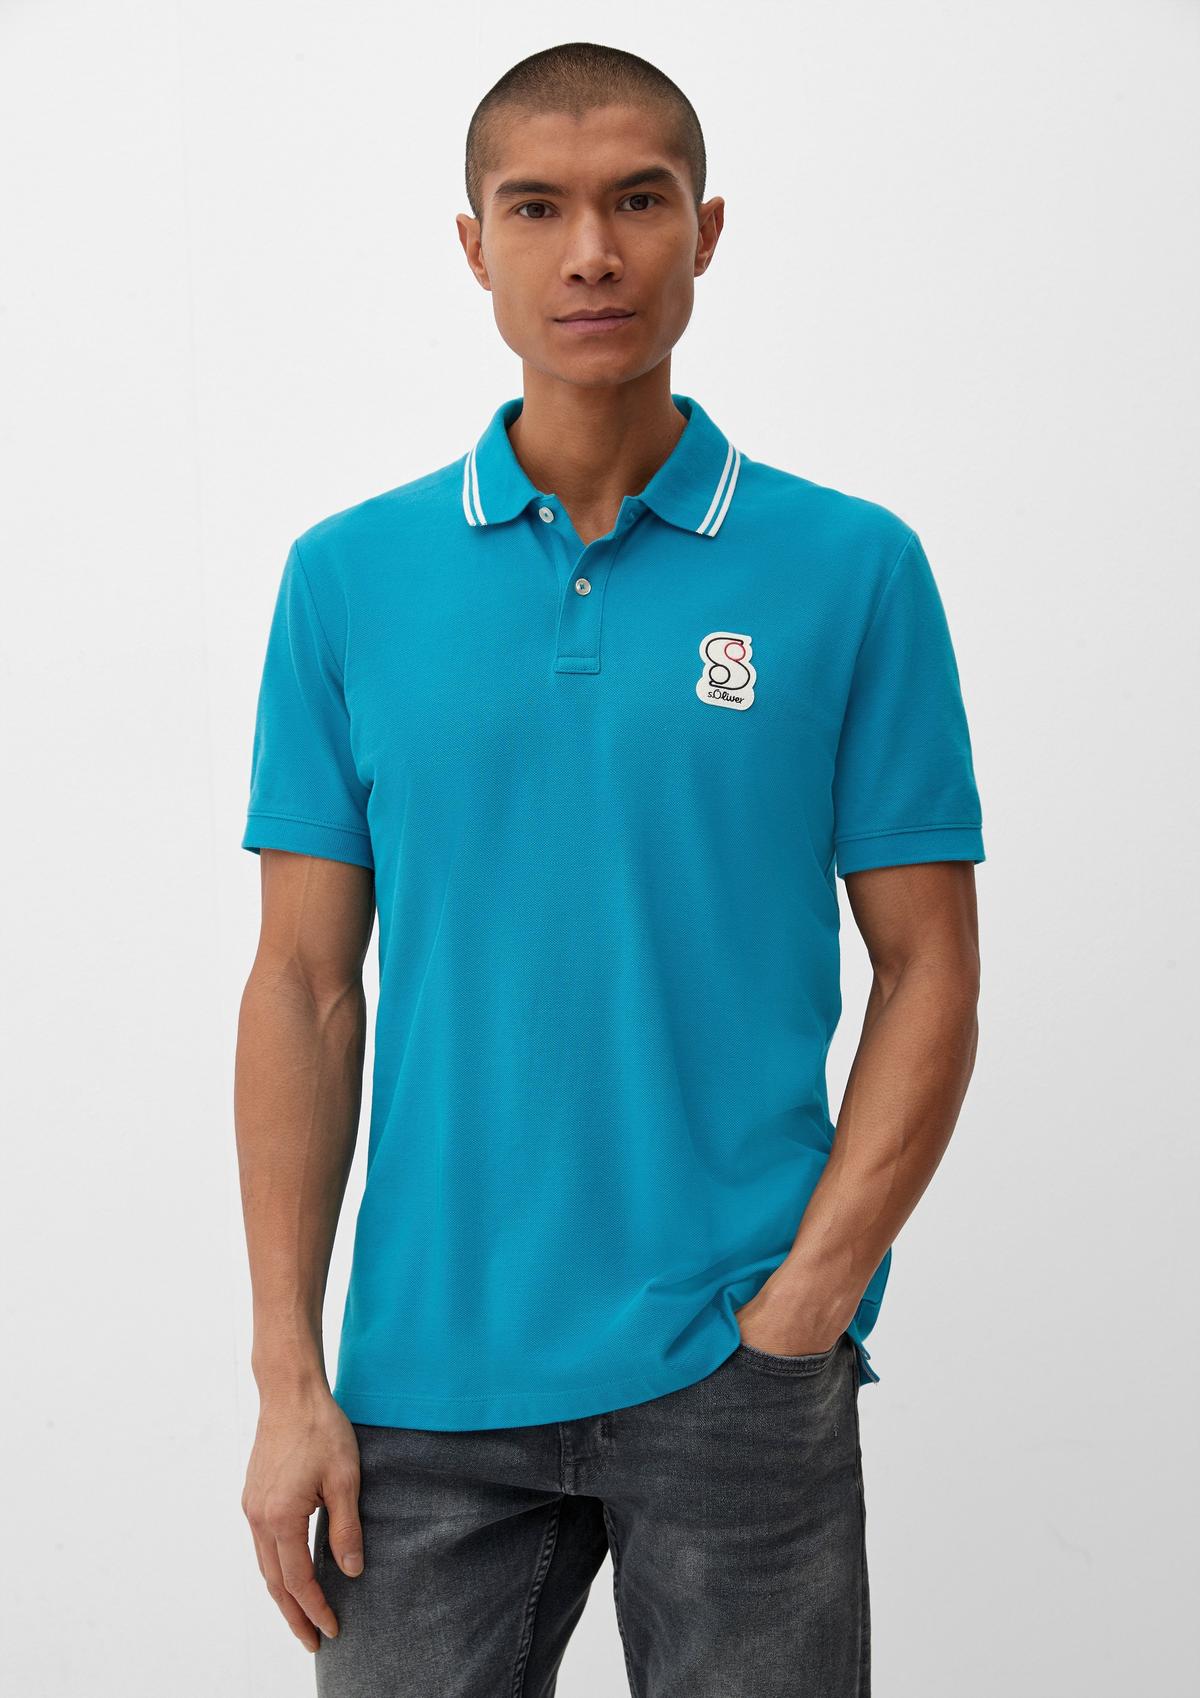 Polo shirt embroidery logo - with white